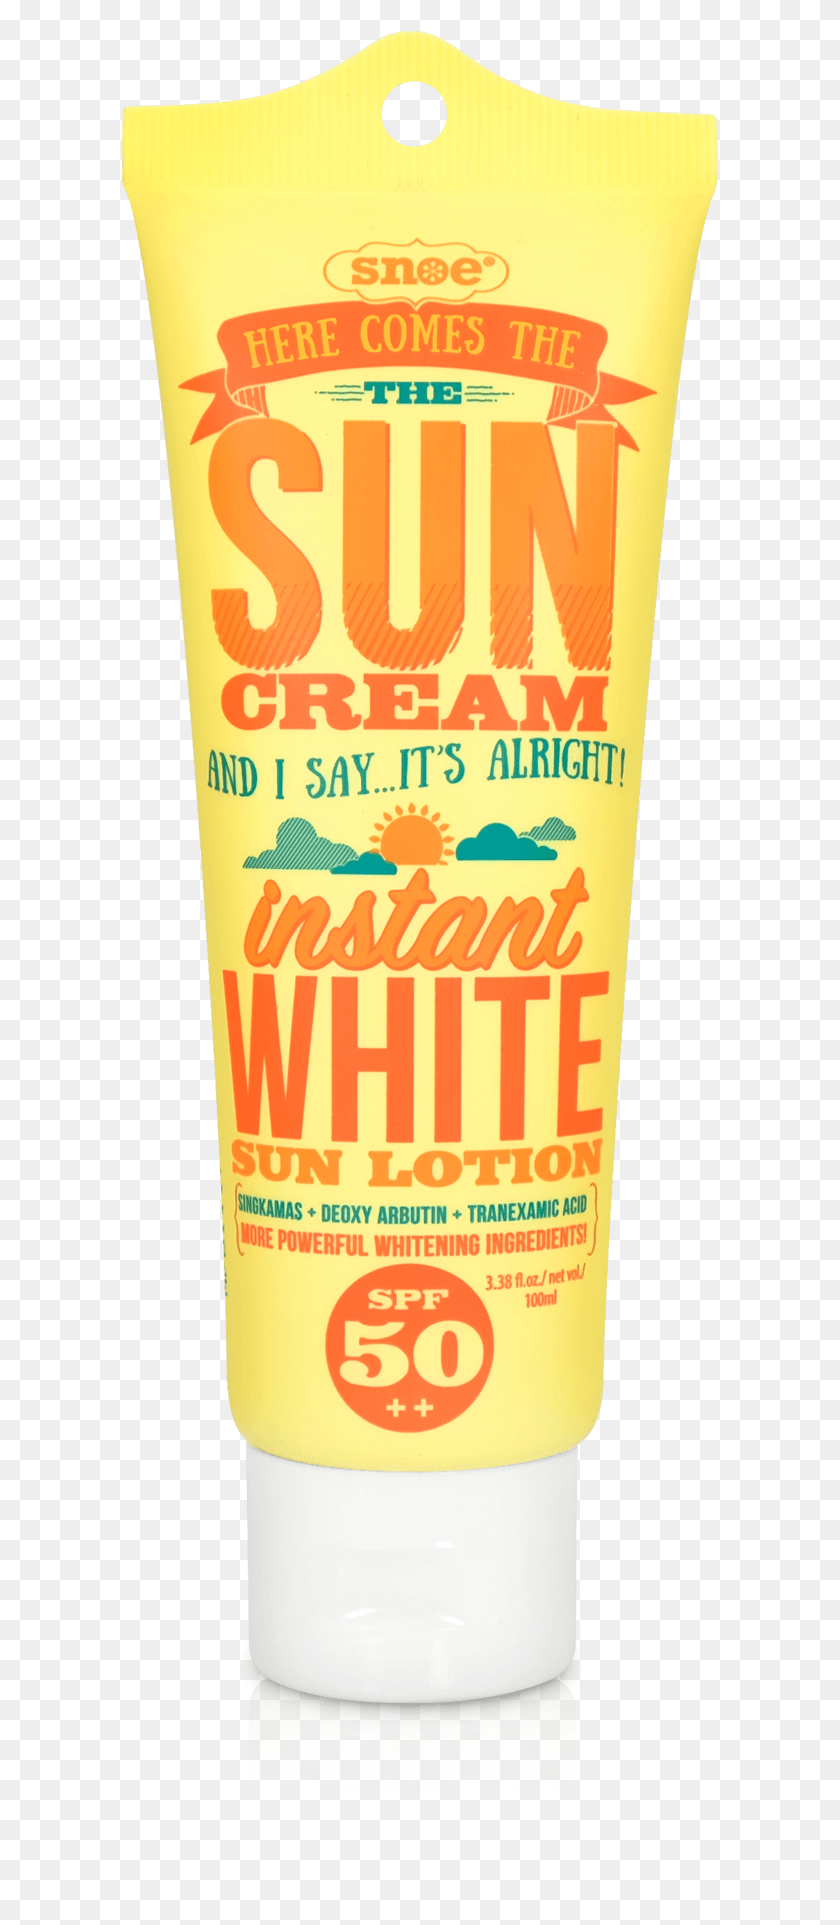 597x1865 Here Comes The Sun Cream Instant White Sun Lotion Spf50 Snack, Sunscreen, Cosmetics, Bottle HD PNG Download